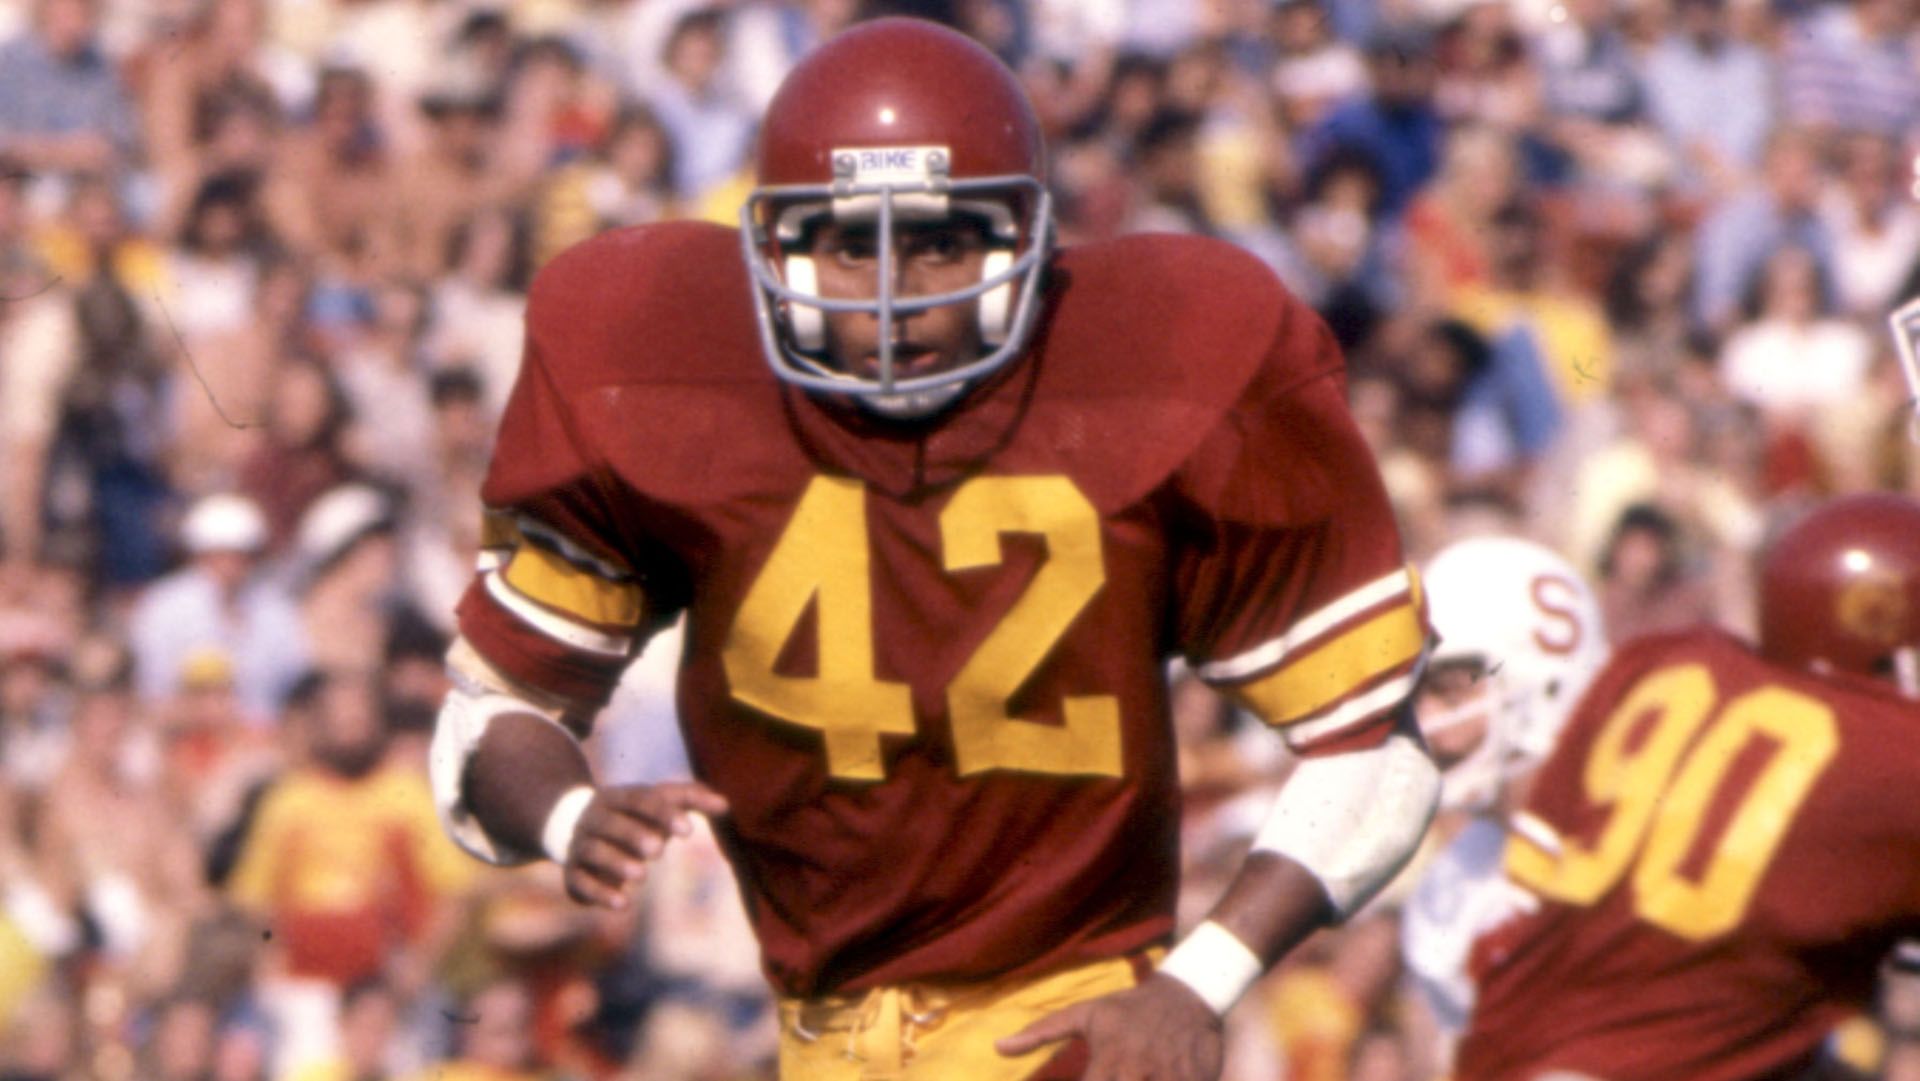 USC Safety Great Ronnie Lott Named To Pac 12 Hall Of Honor